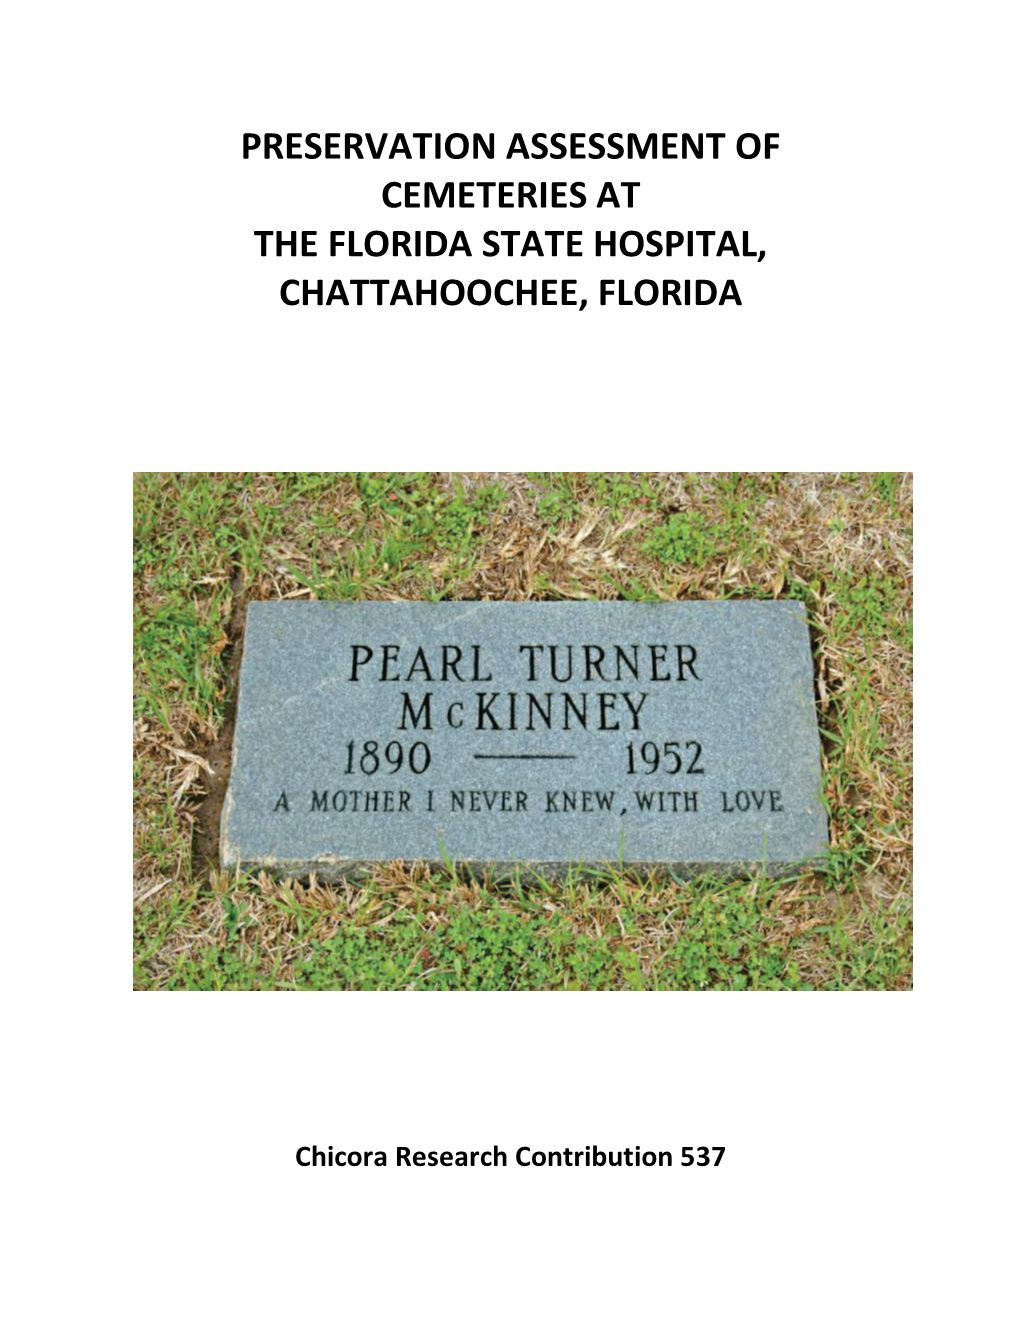 Preservation Assessment of Cemeteries at the Florida State Hospital, Chattahoochee, Florida